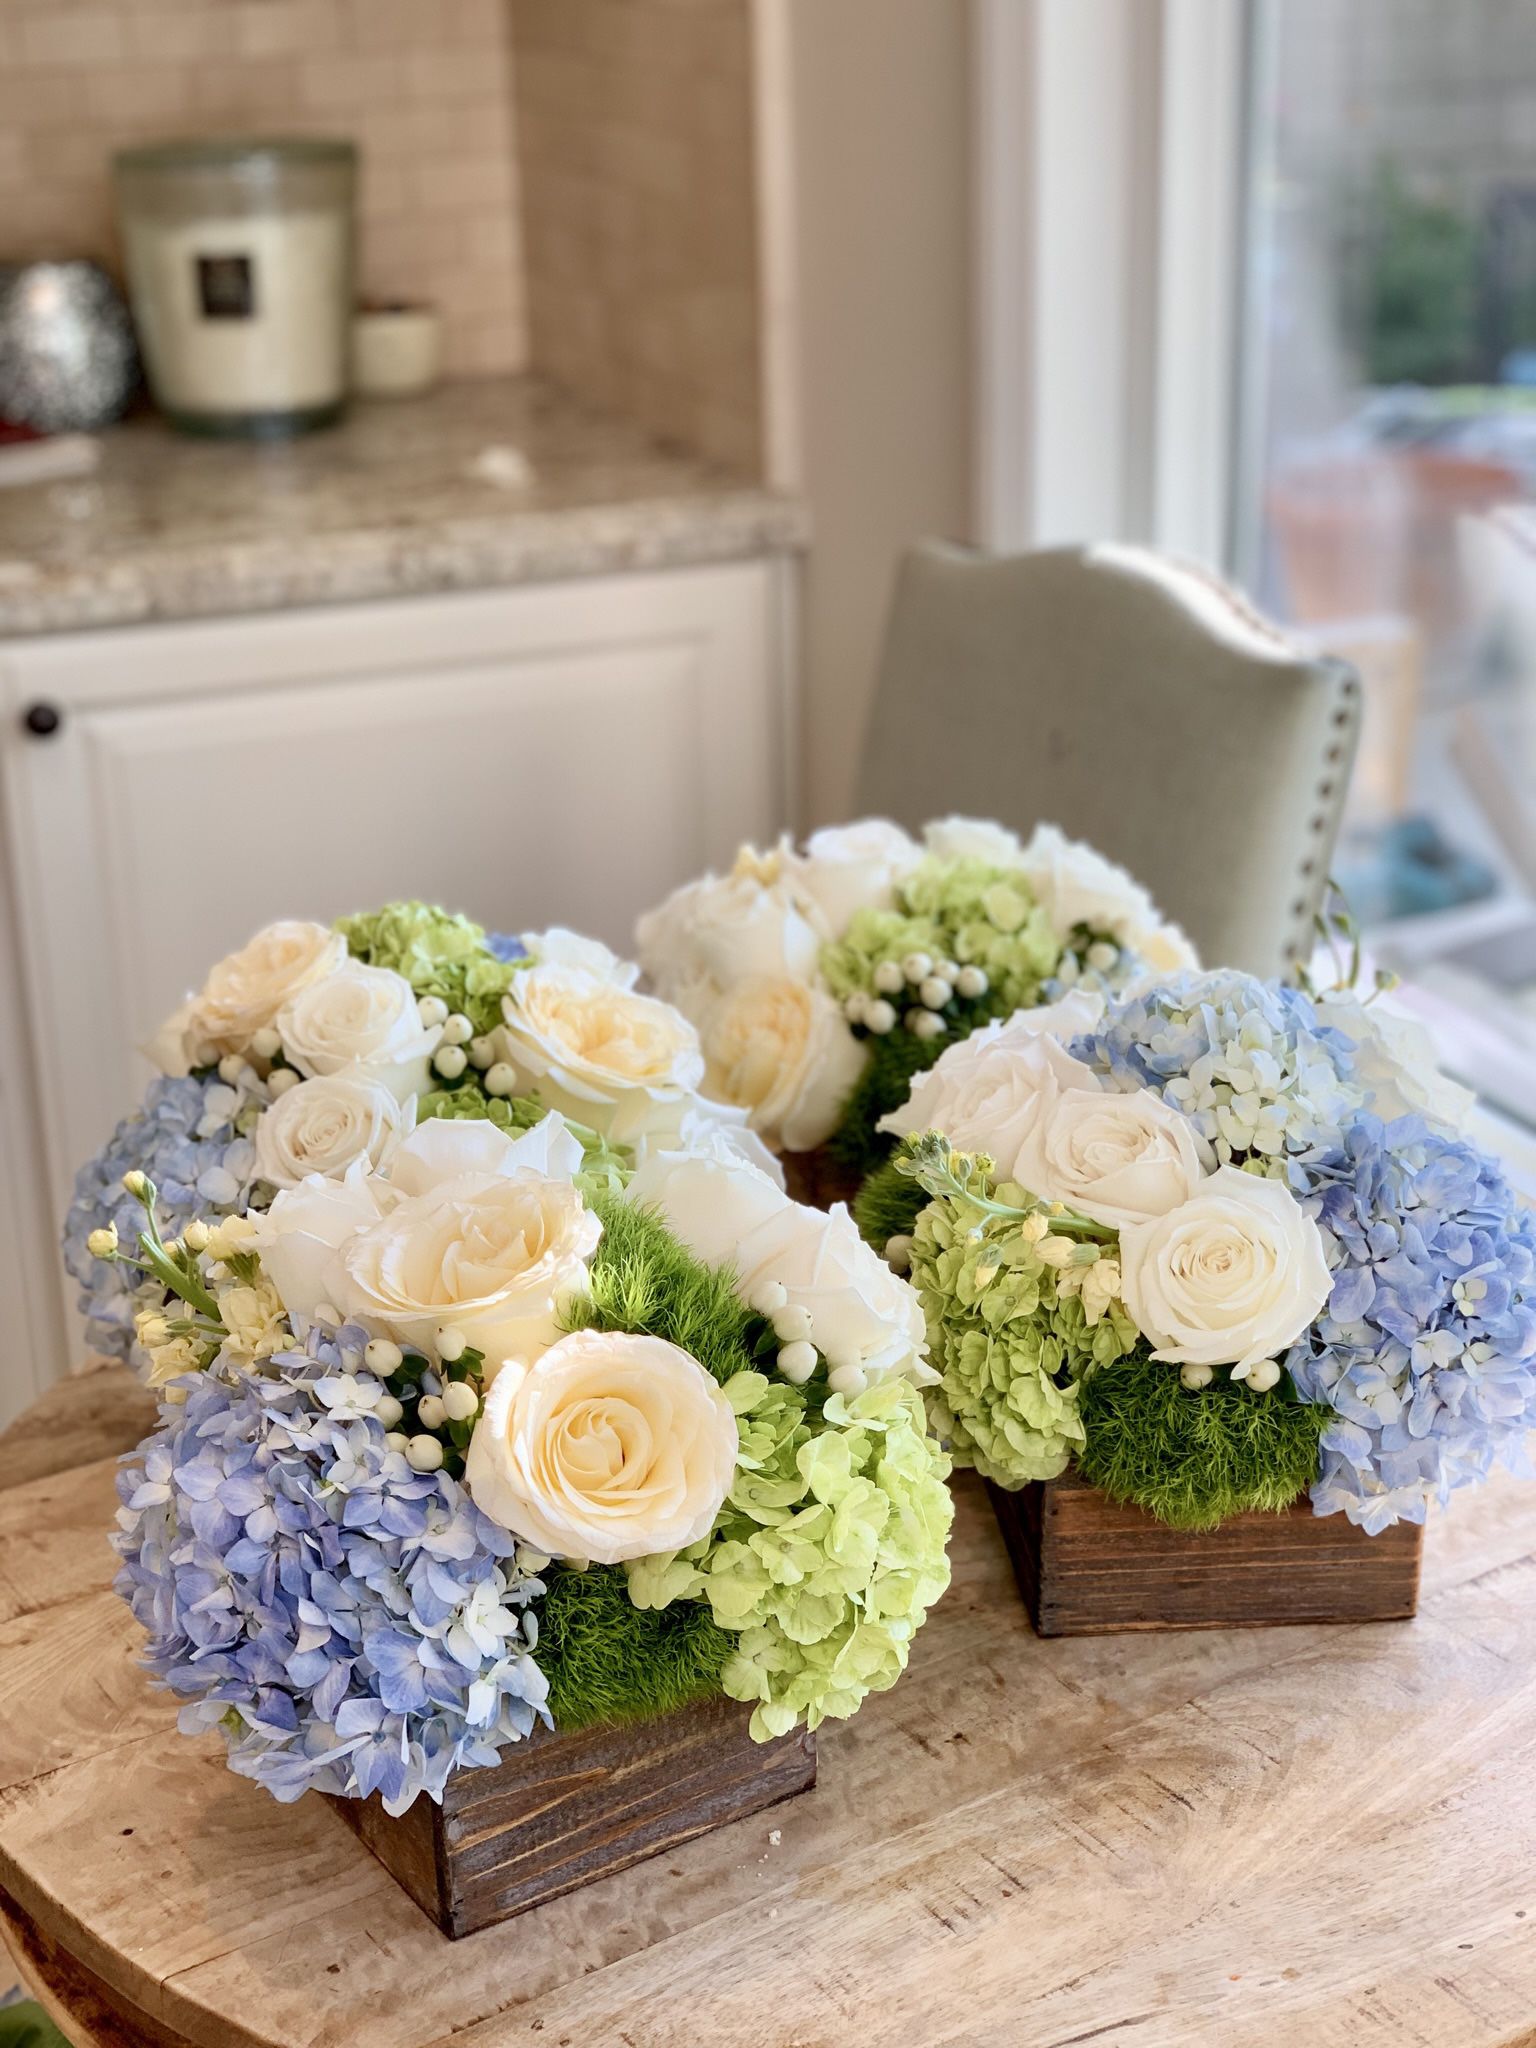 Baby shower Flowers Centerpieces 